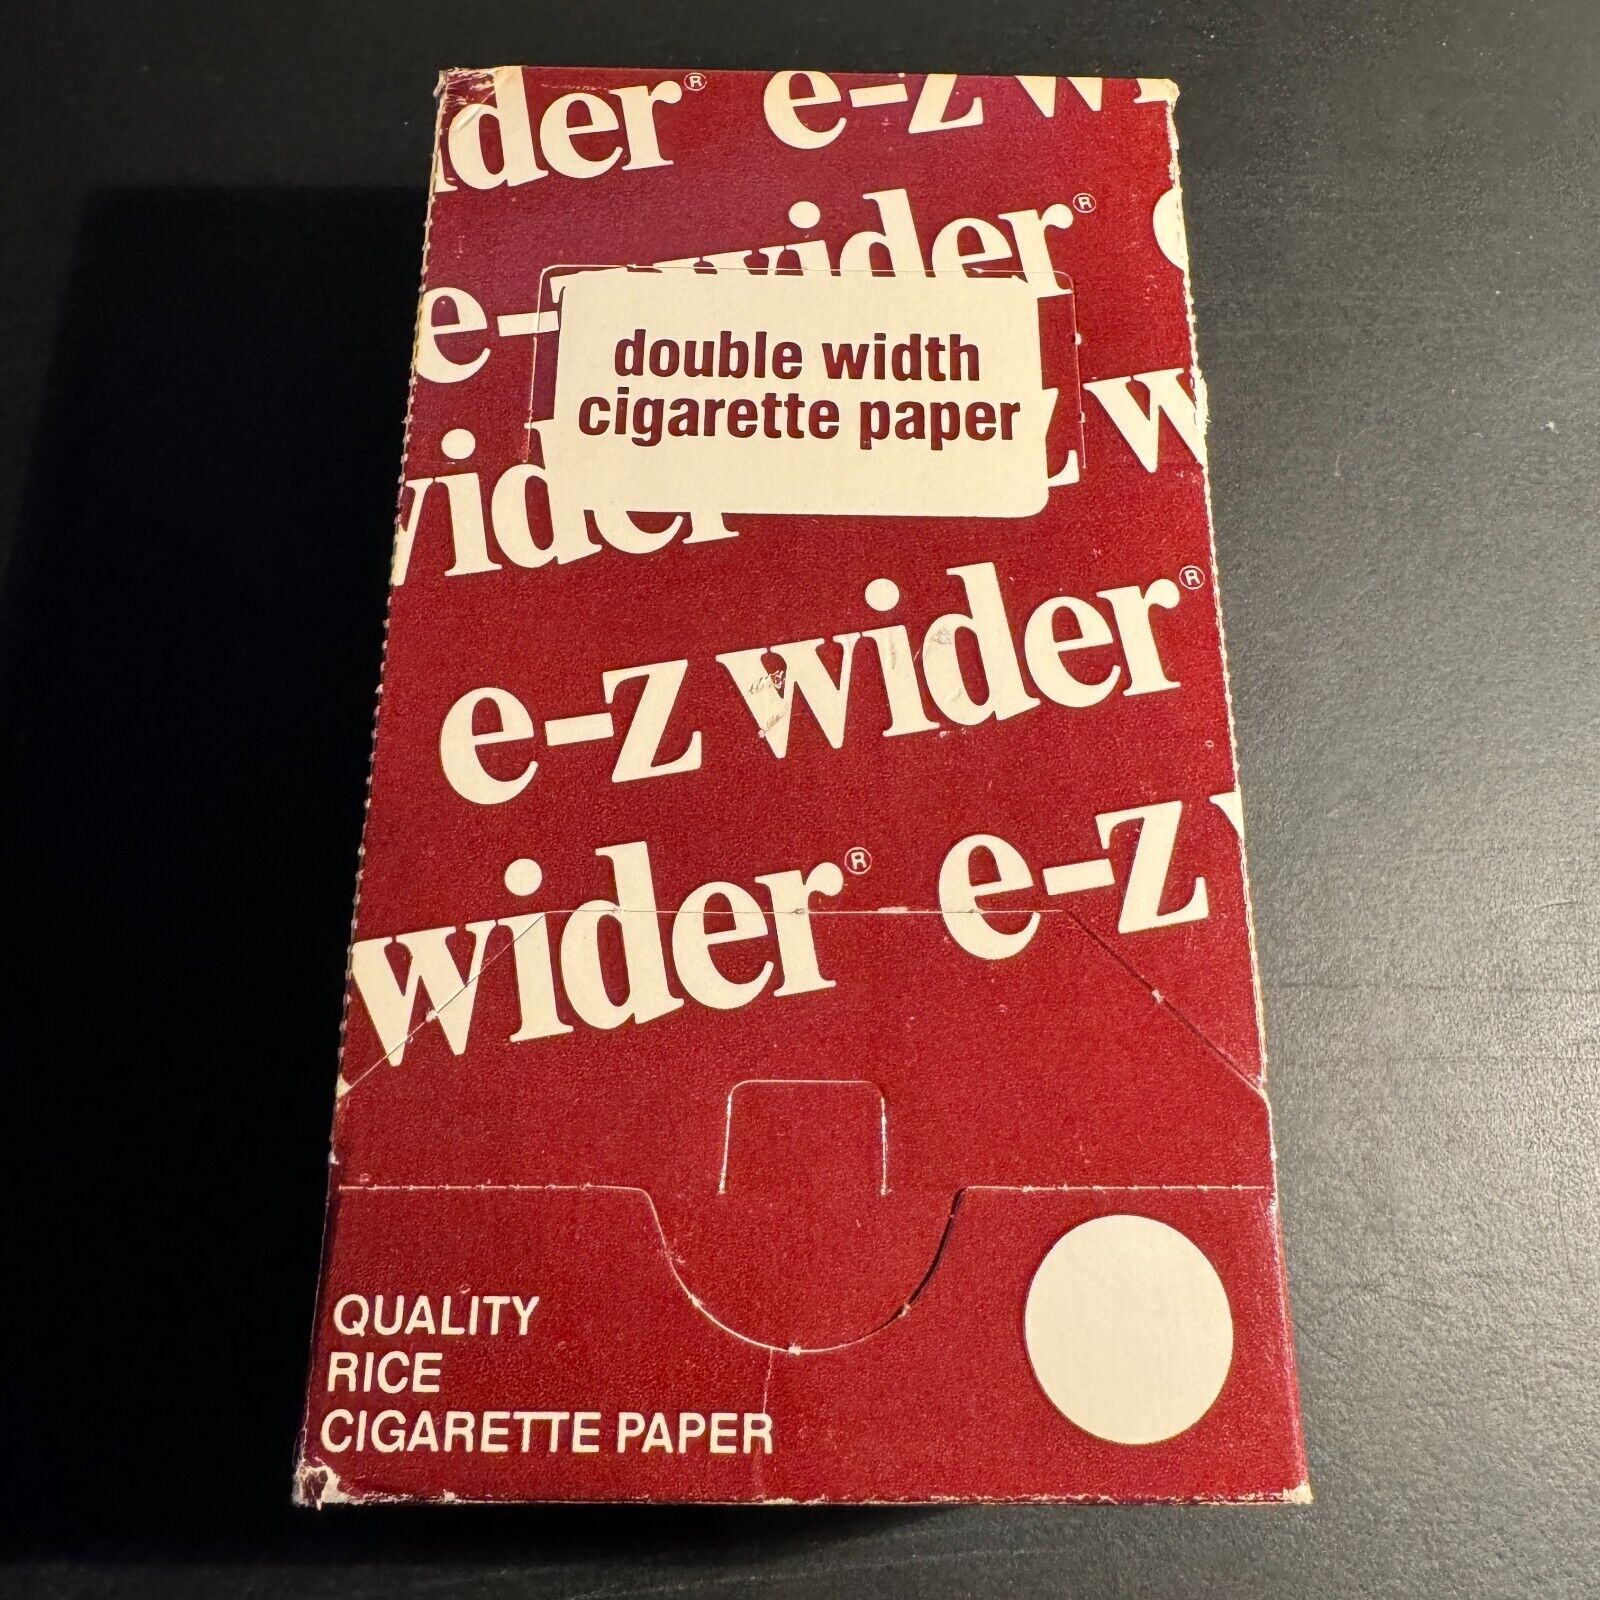 Vintage E-Z Wider Rolling Papers - Sealed Box 25 Packs, 32 Sheets Per Pack - NOS